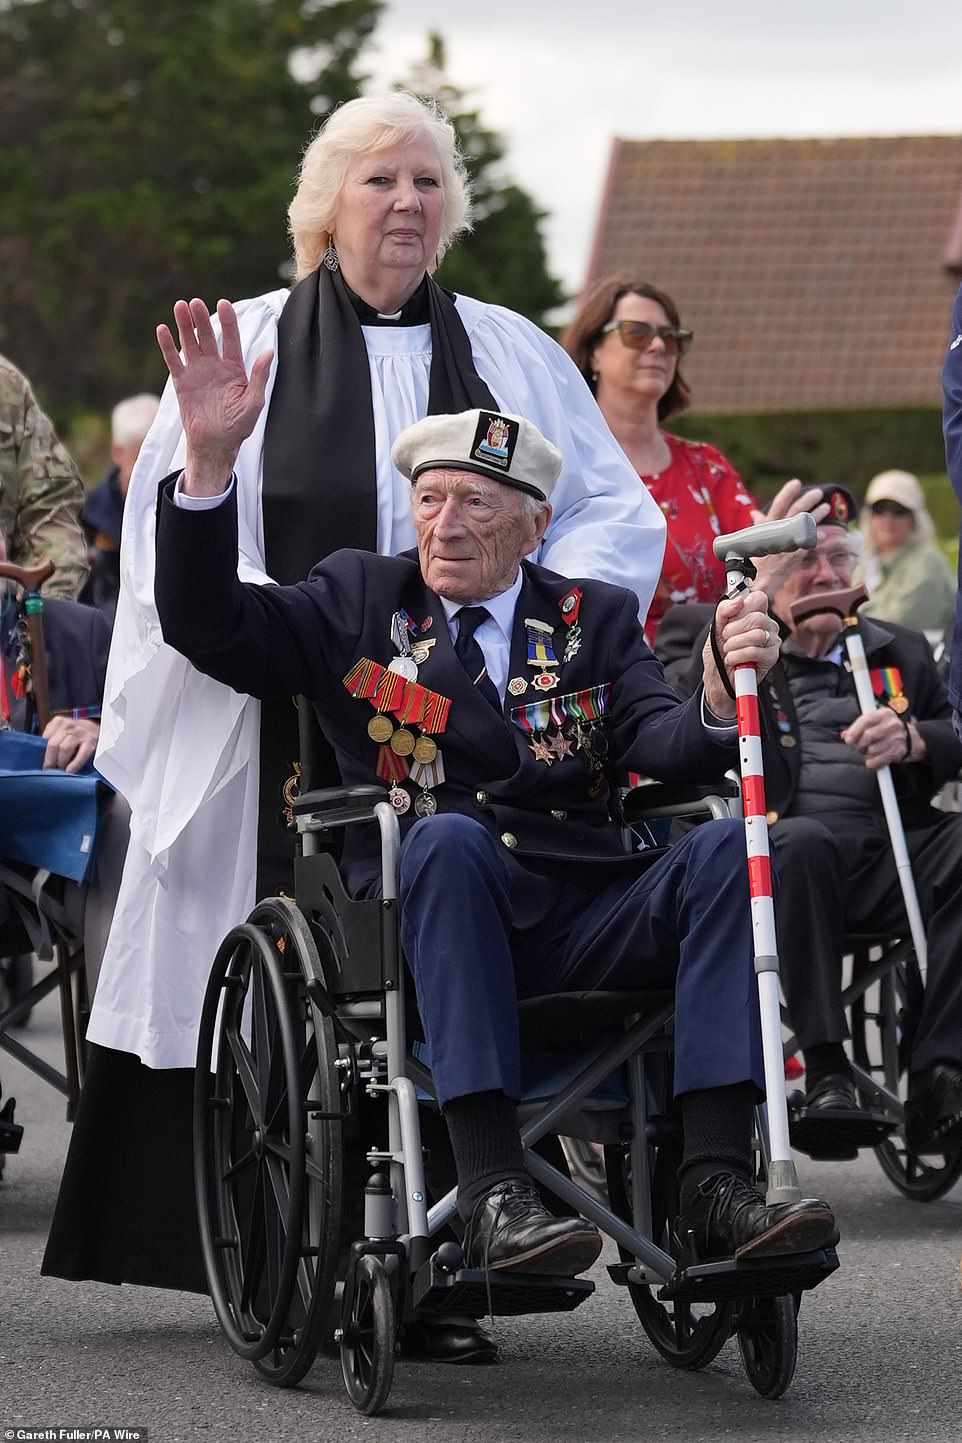 D-Day veteran Alec Penstone, 98, is pushed past crowds at the Spirit of Normandy Trust service